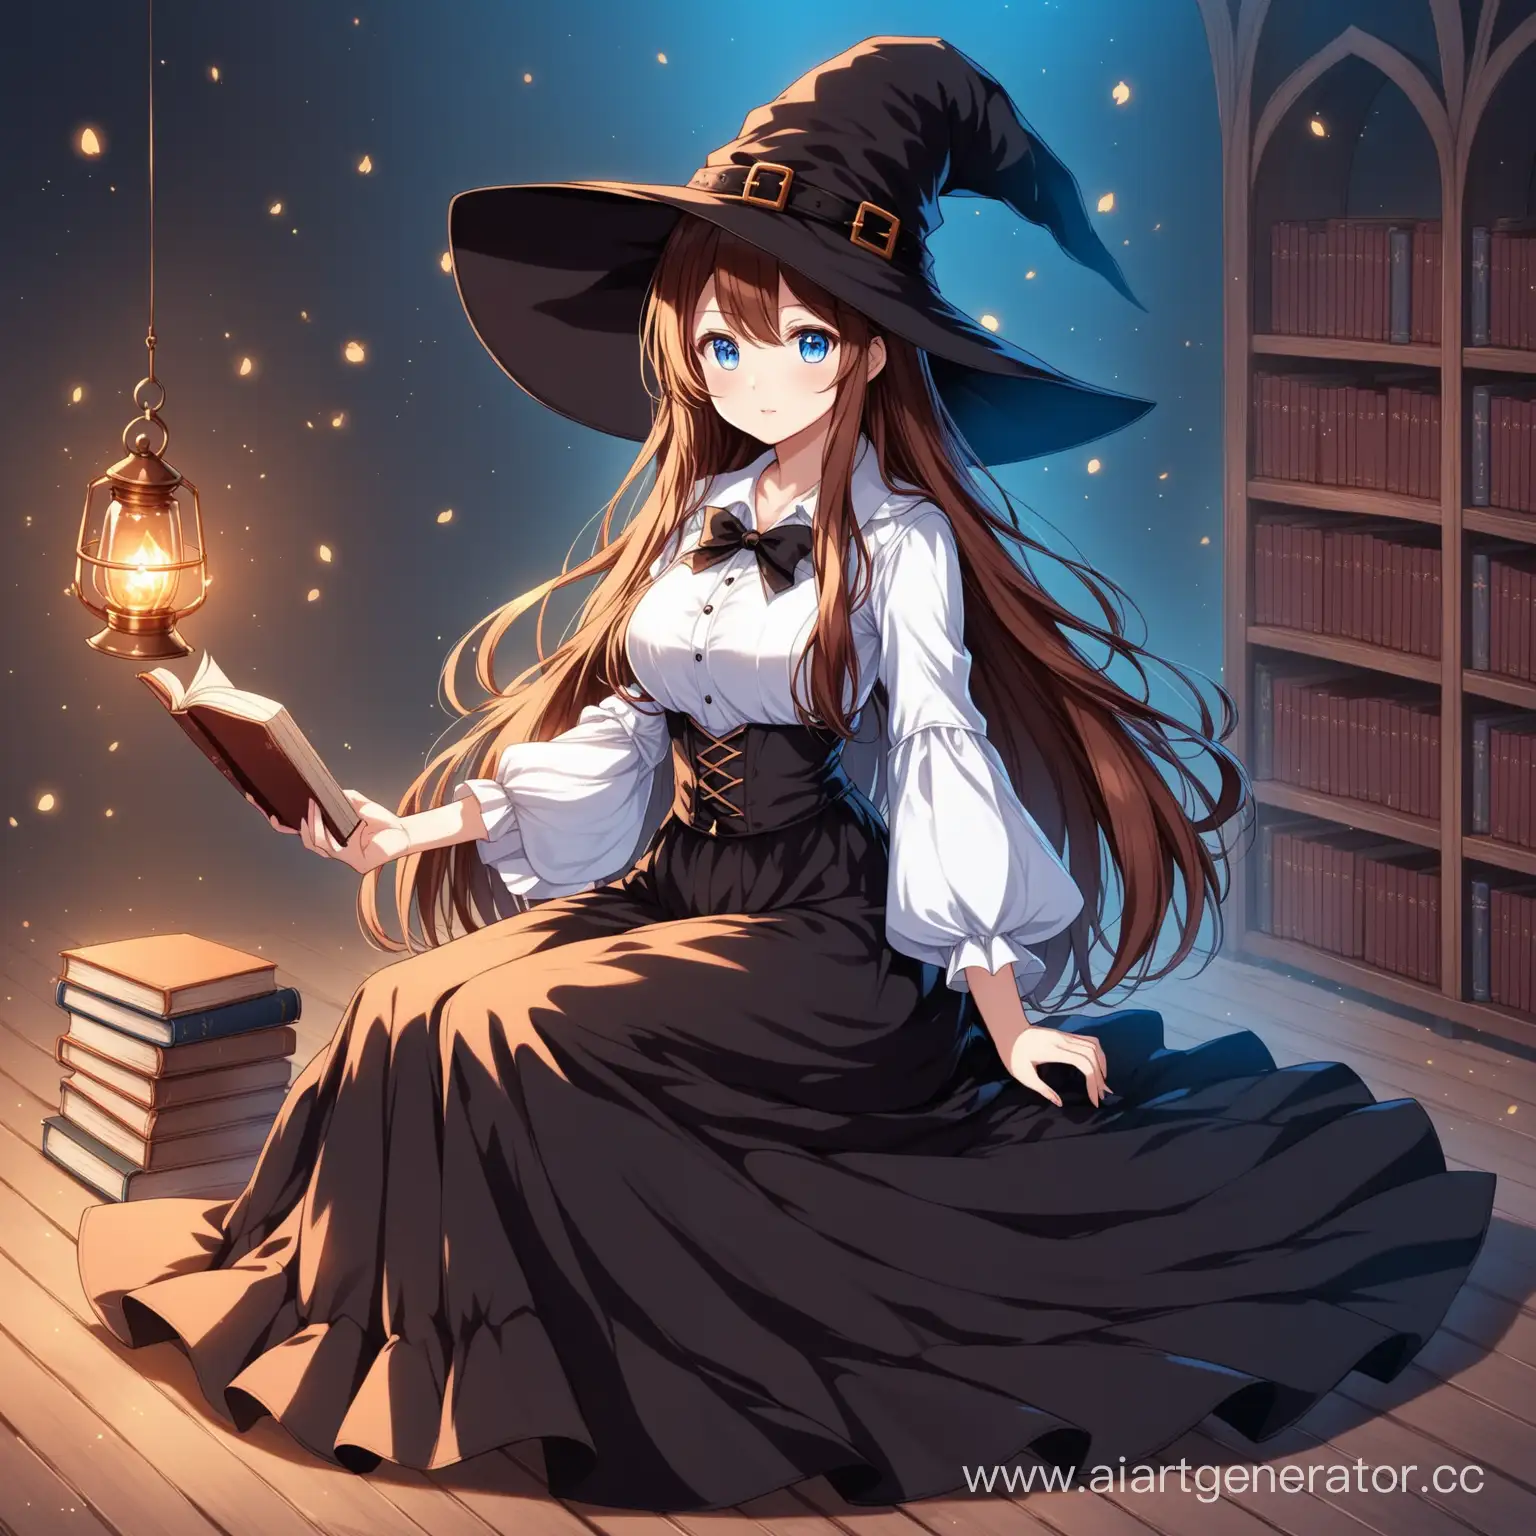 Anime-Witch-with-Chestnut-Hair-and-Blue-Eyes-Holding-a-Spell-Book